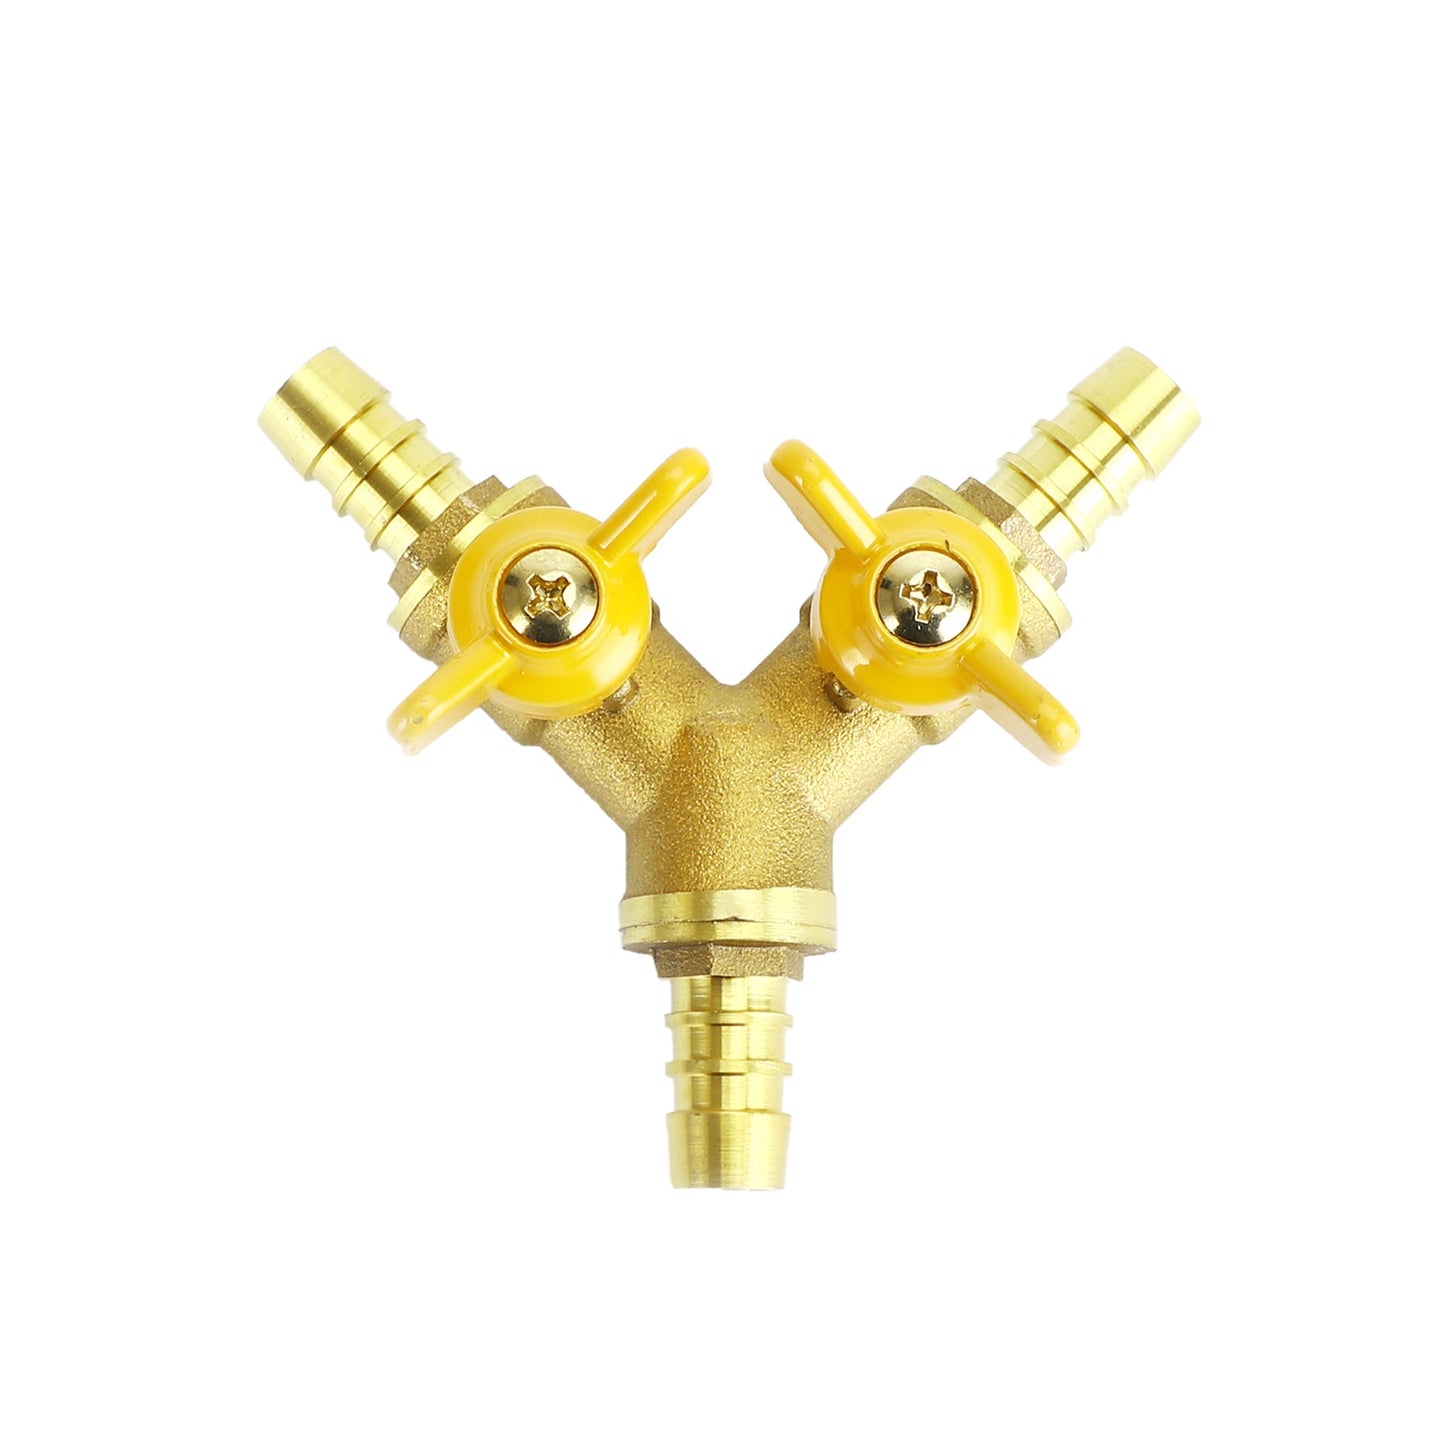 3/8" Hose Barb Ball Valve Y Shaped 3 Way Connector Barb Brass Fitting OD 11mm